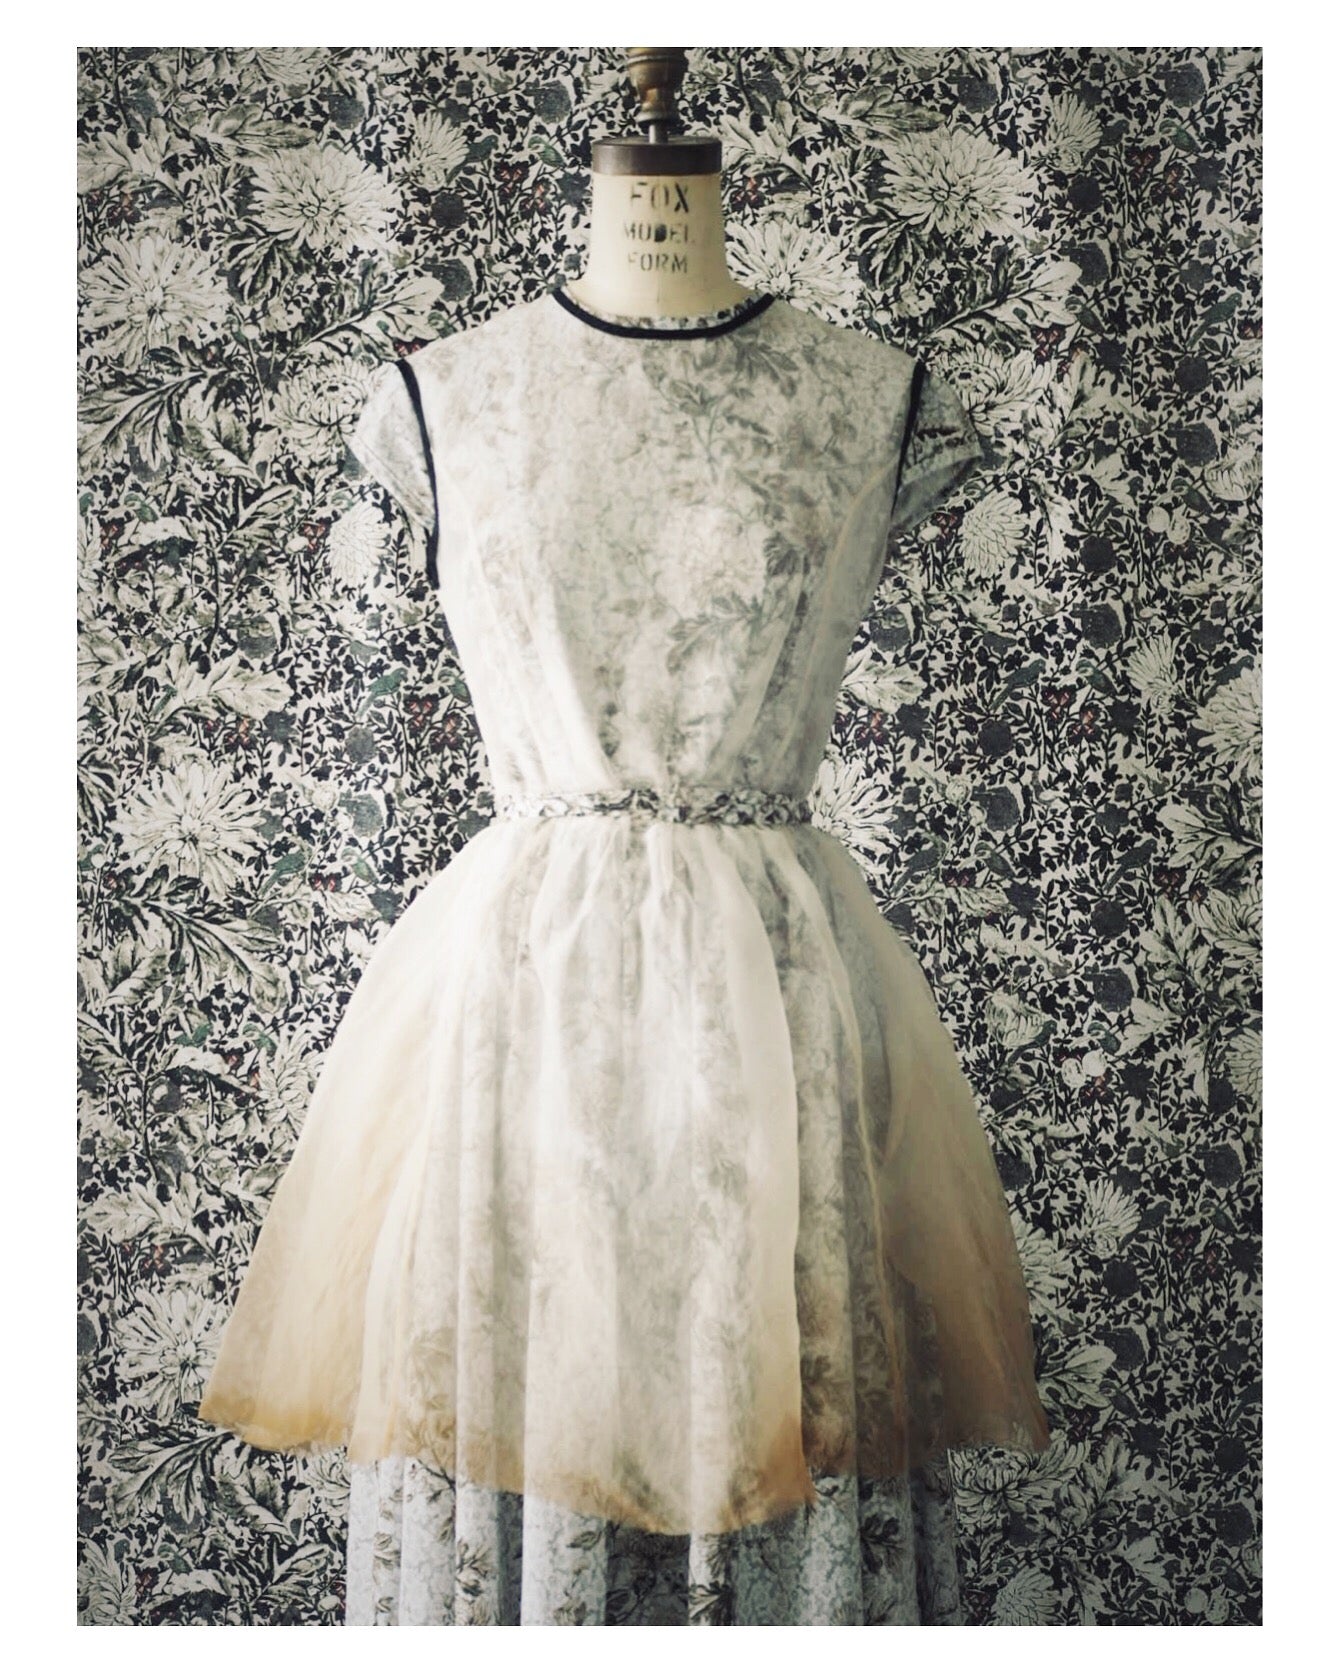 organza chopped dress overlay with tea stain